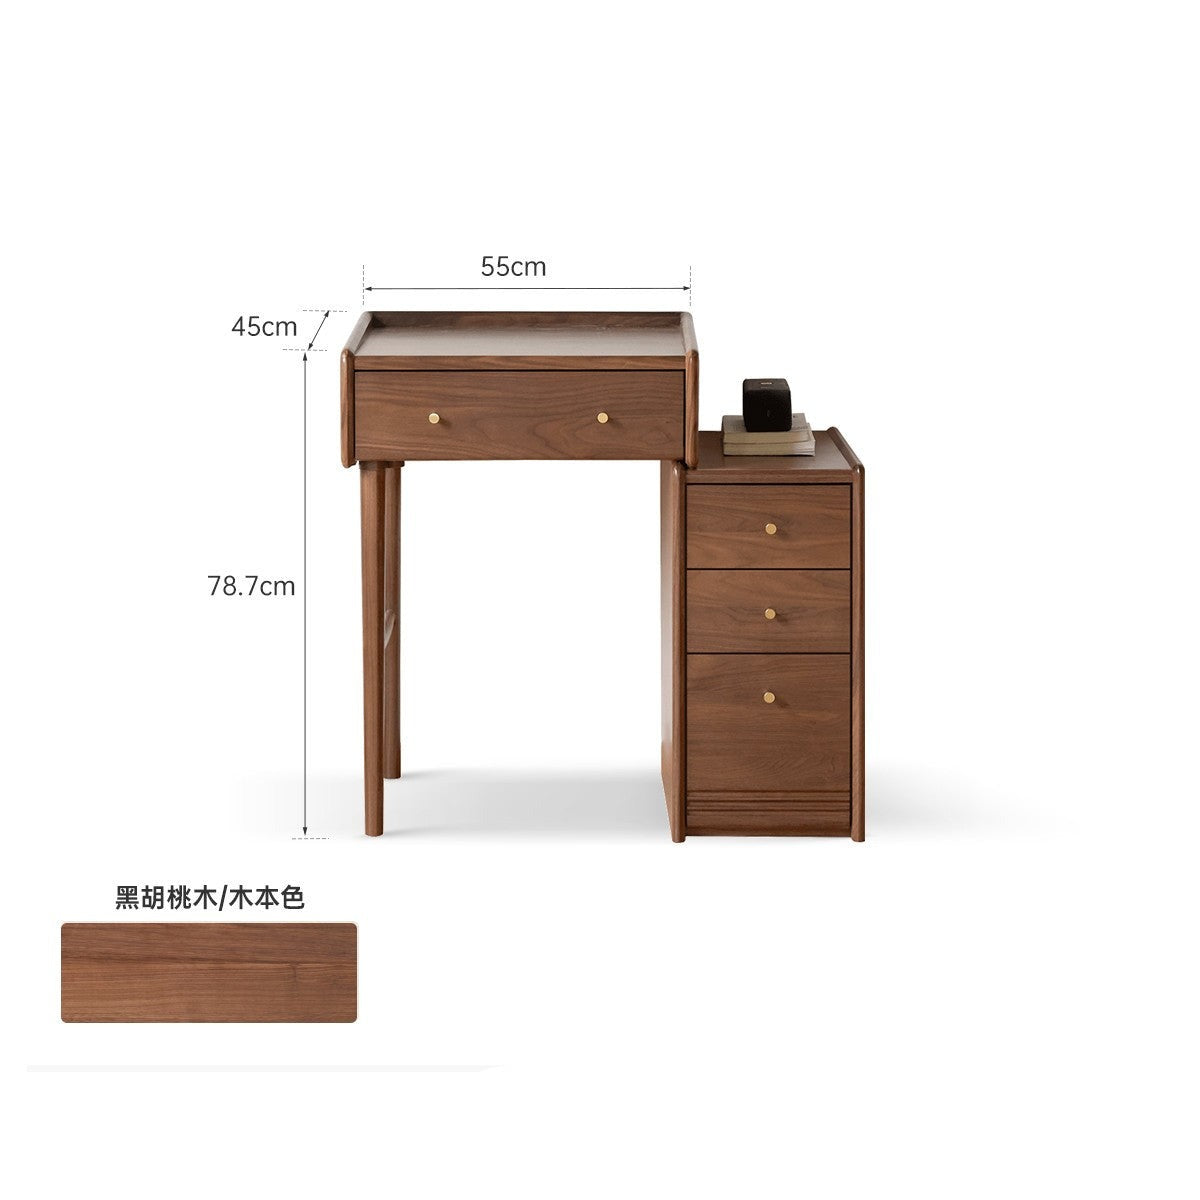 Black walnut solid wood dressing table cabinet integrated-